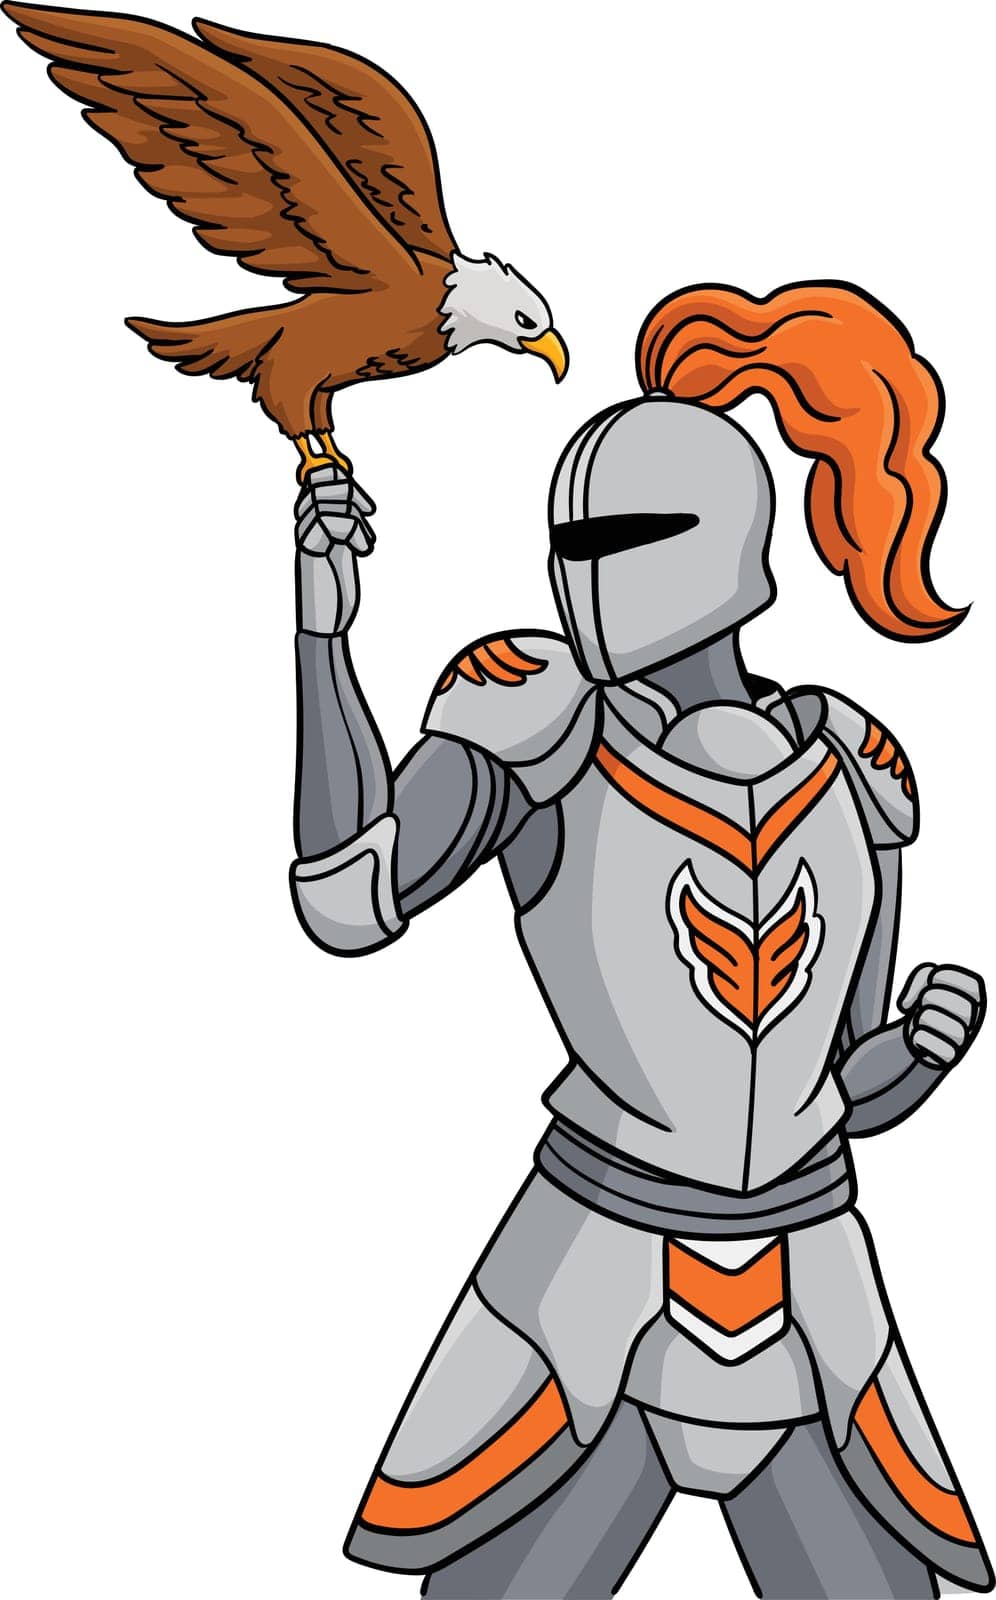 Knight with an Eagle Cartoon Colored Clipart by abbydesign